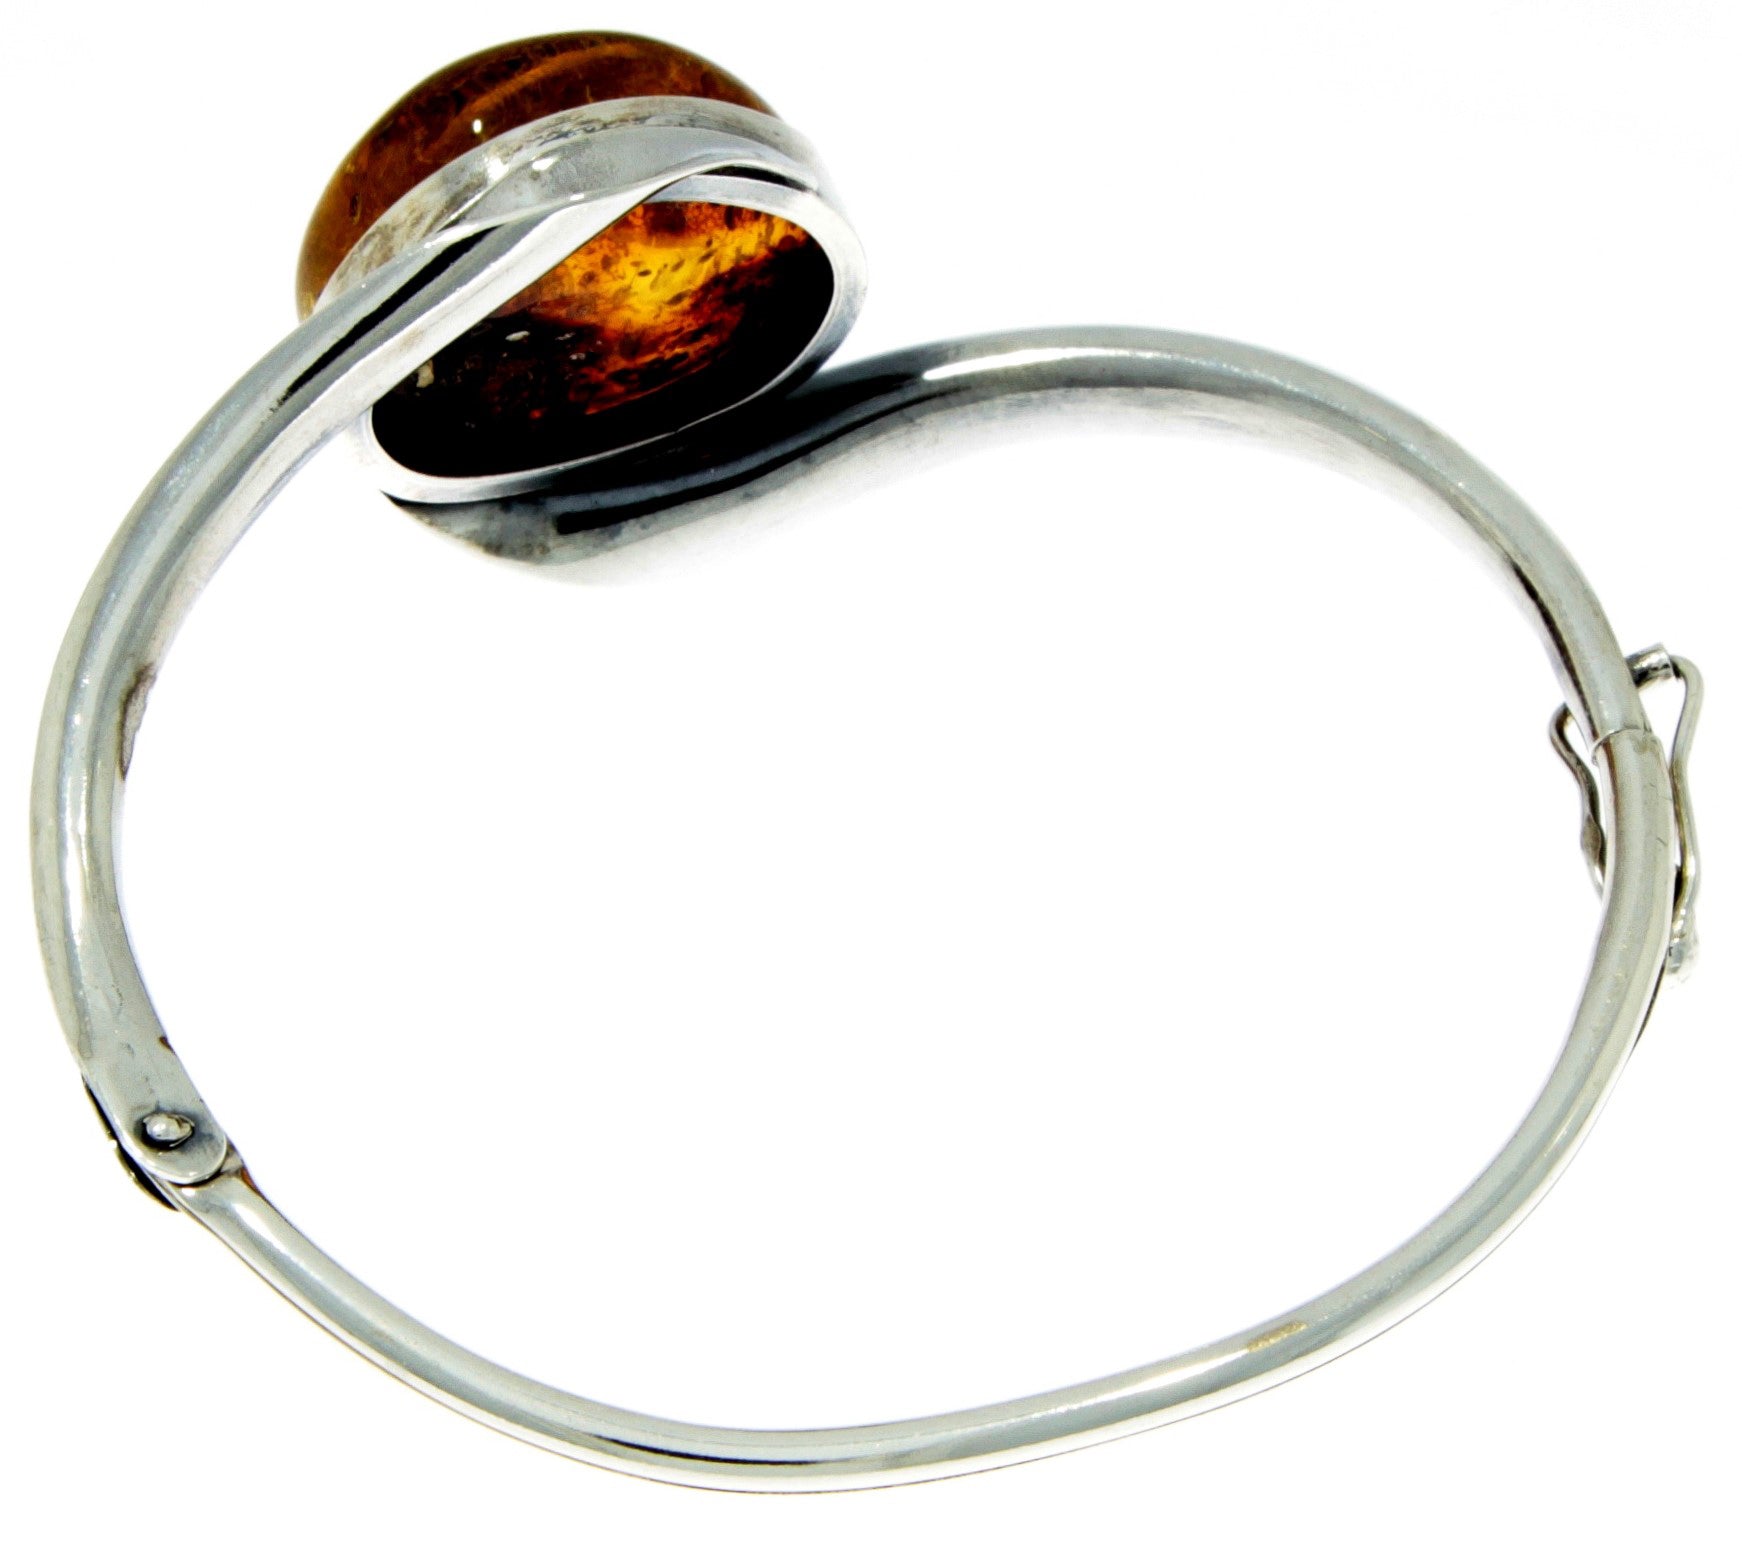 925 Sterling Silver & Genuine Cognac Baltic Amber Exclusive Bangle - BL0140